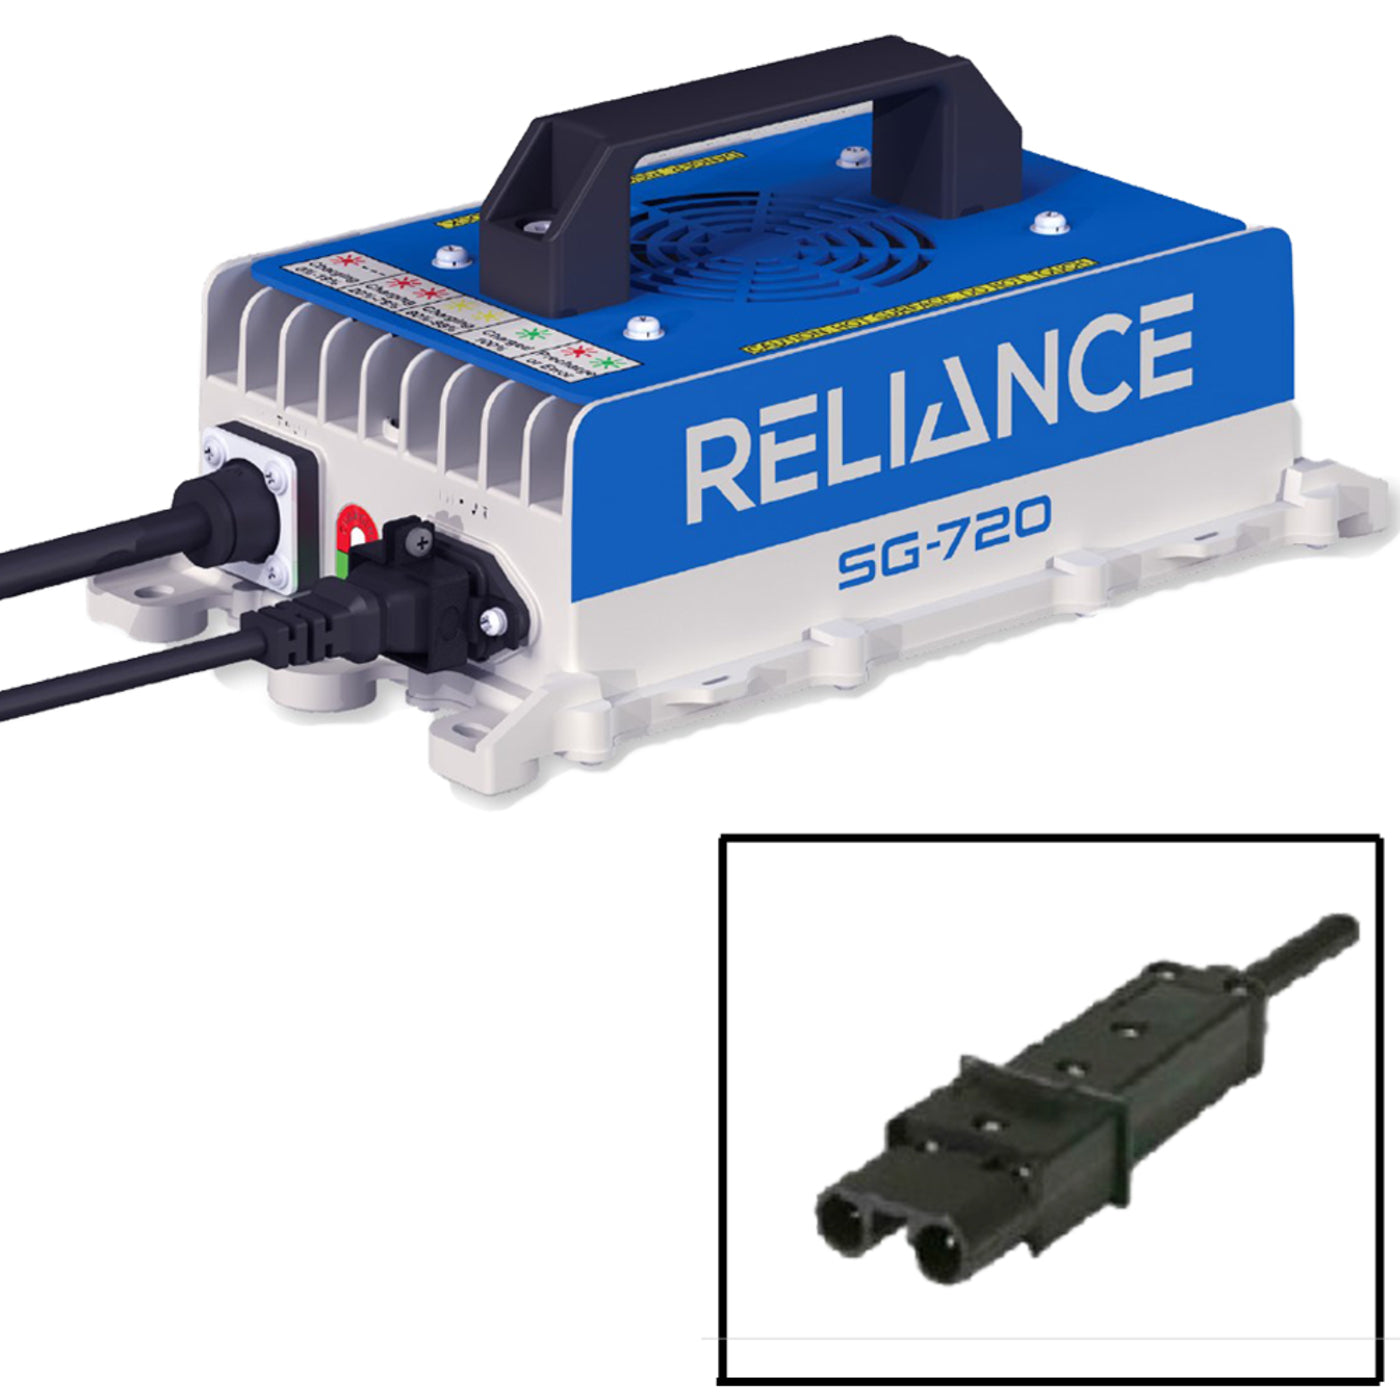 RELIANCE‚Ñ¢ SG-720 High Frequency Industrial Yamaha Charger - 48v G19-G22 Paddle